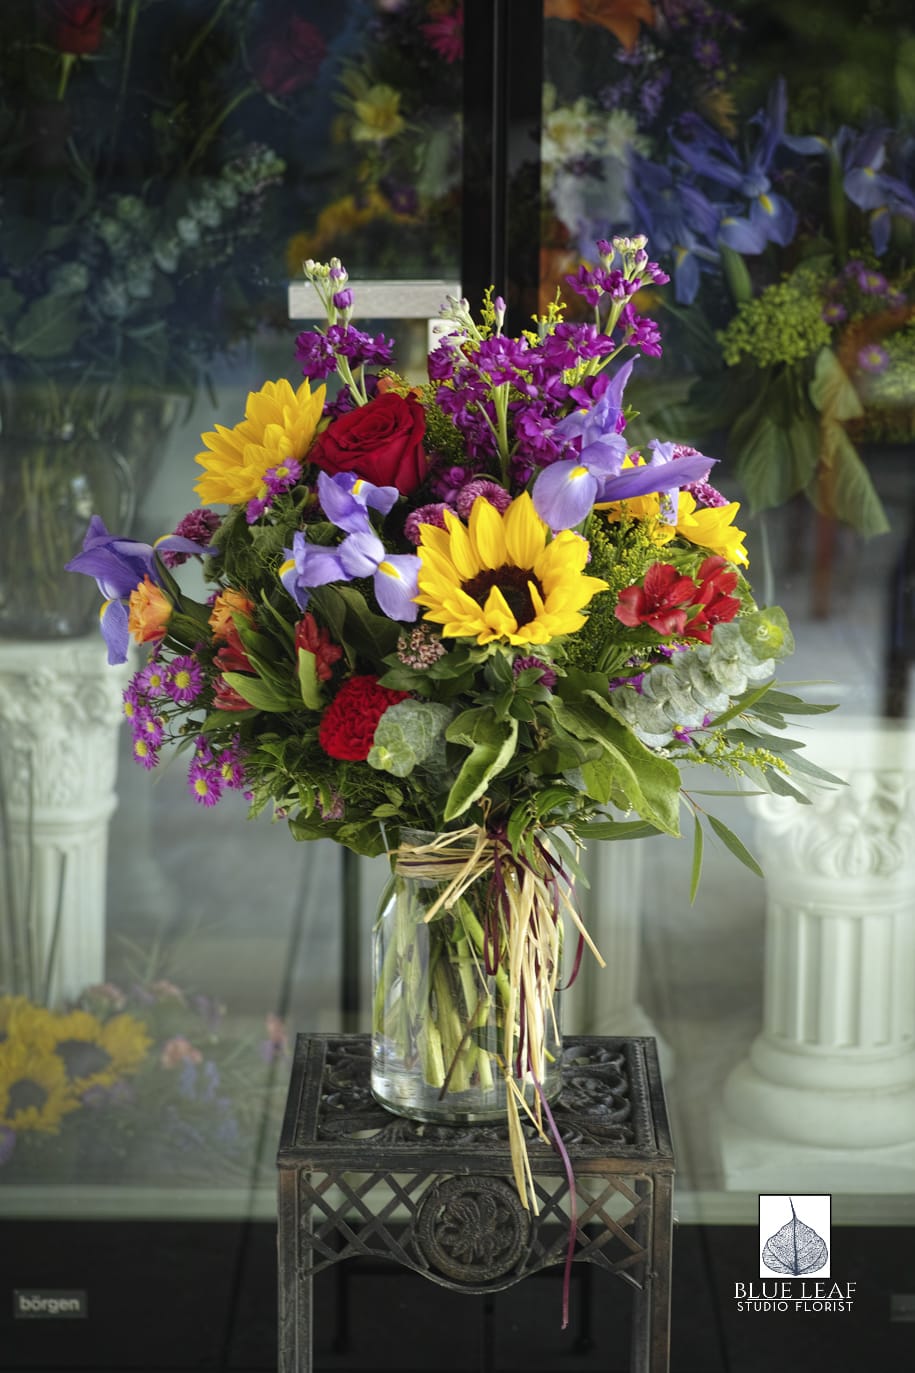 Summer Fun - A fun, uplifting bouquet of sunflowers, purple iris, red roses, stock, and other filler flowers arranged in a clear glass vase.